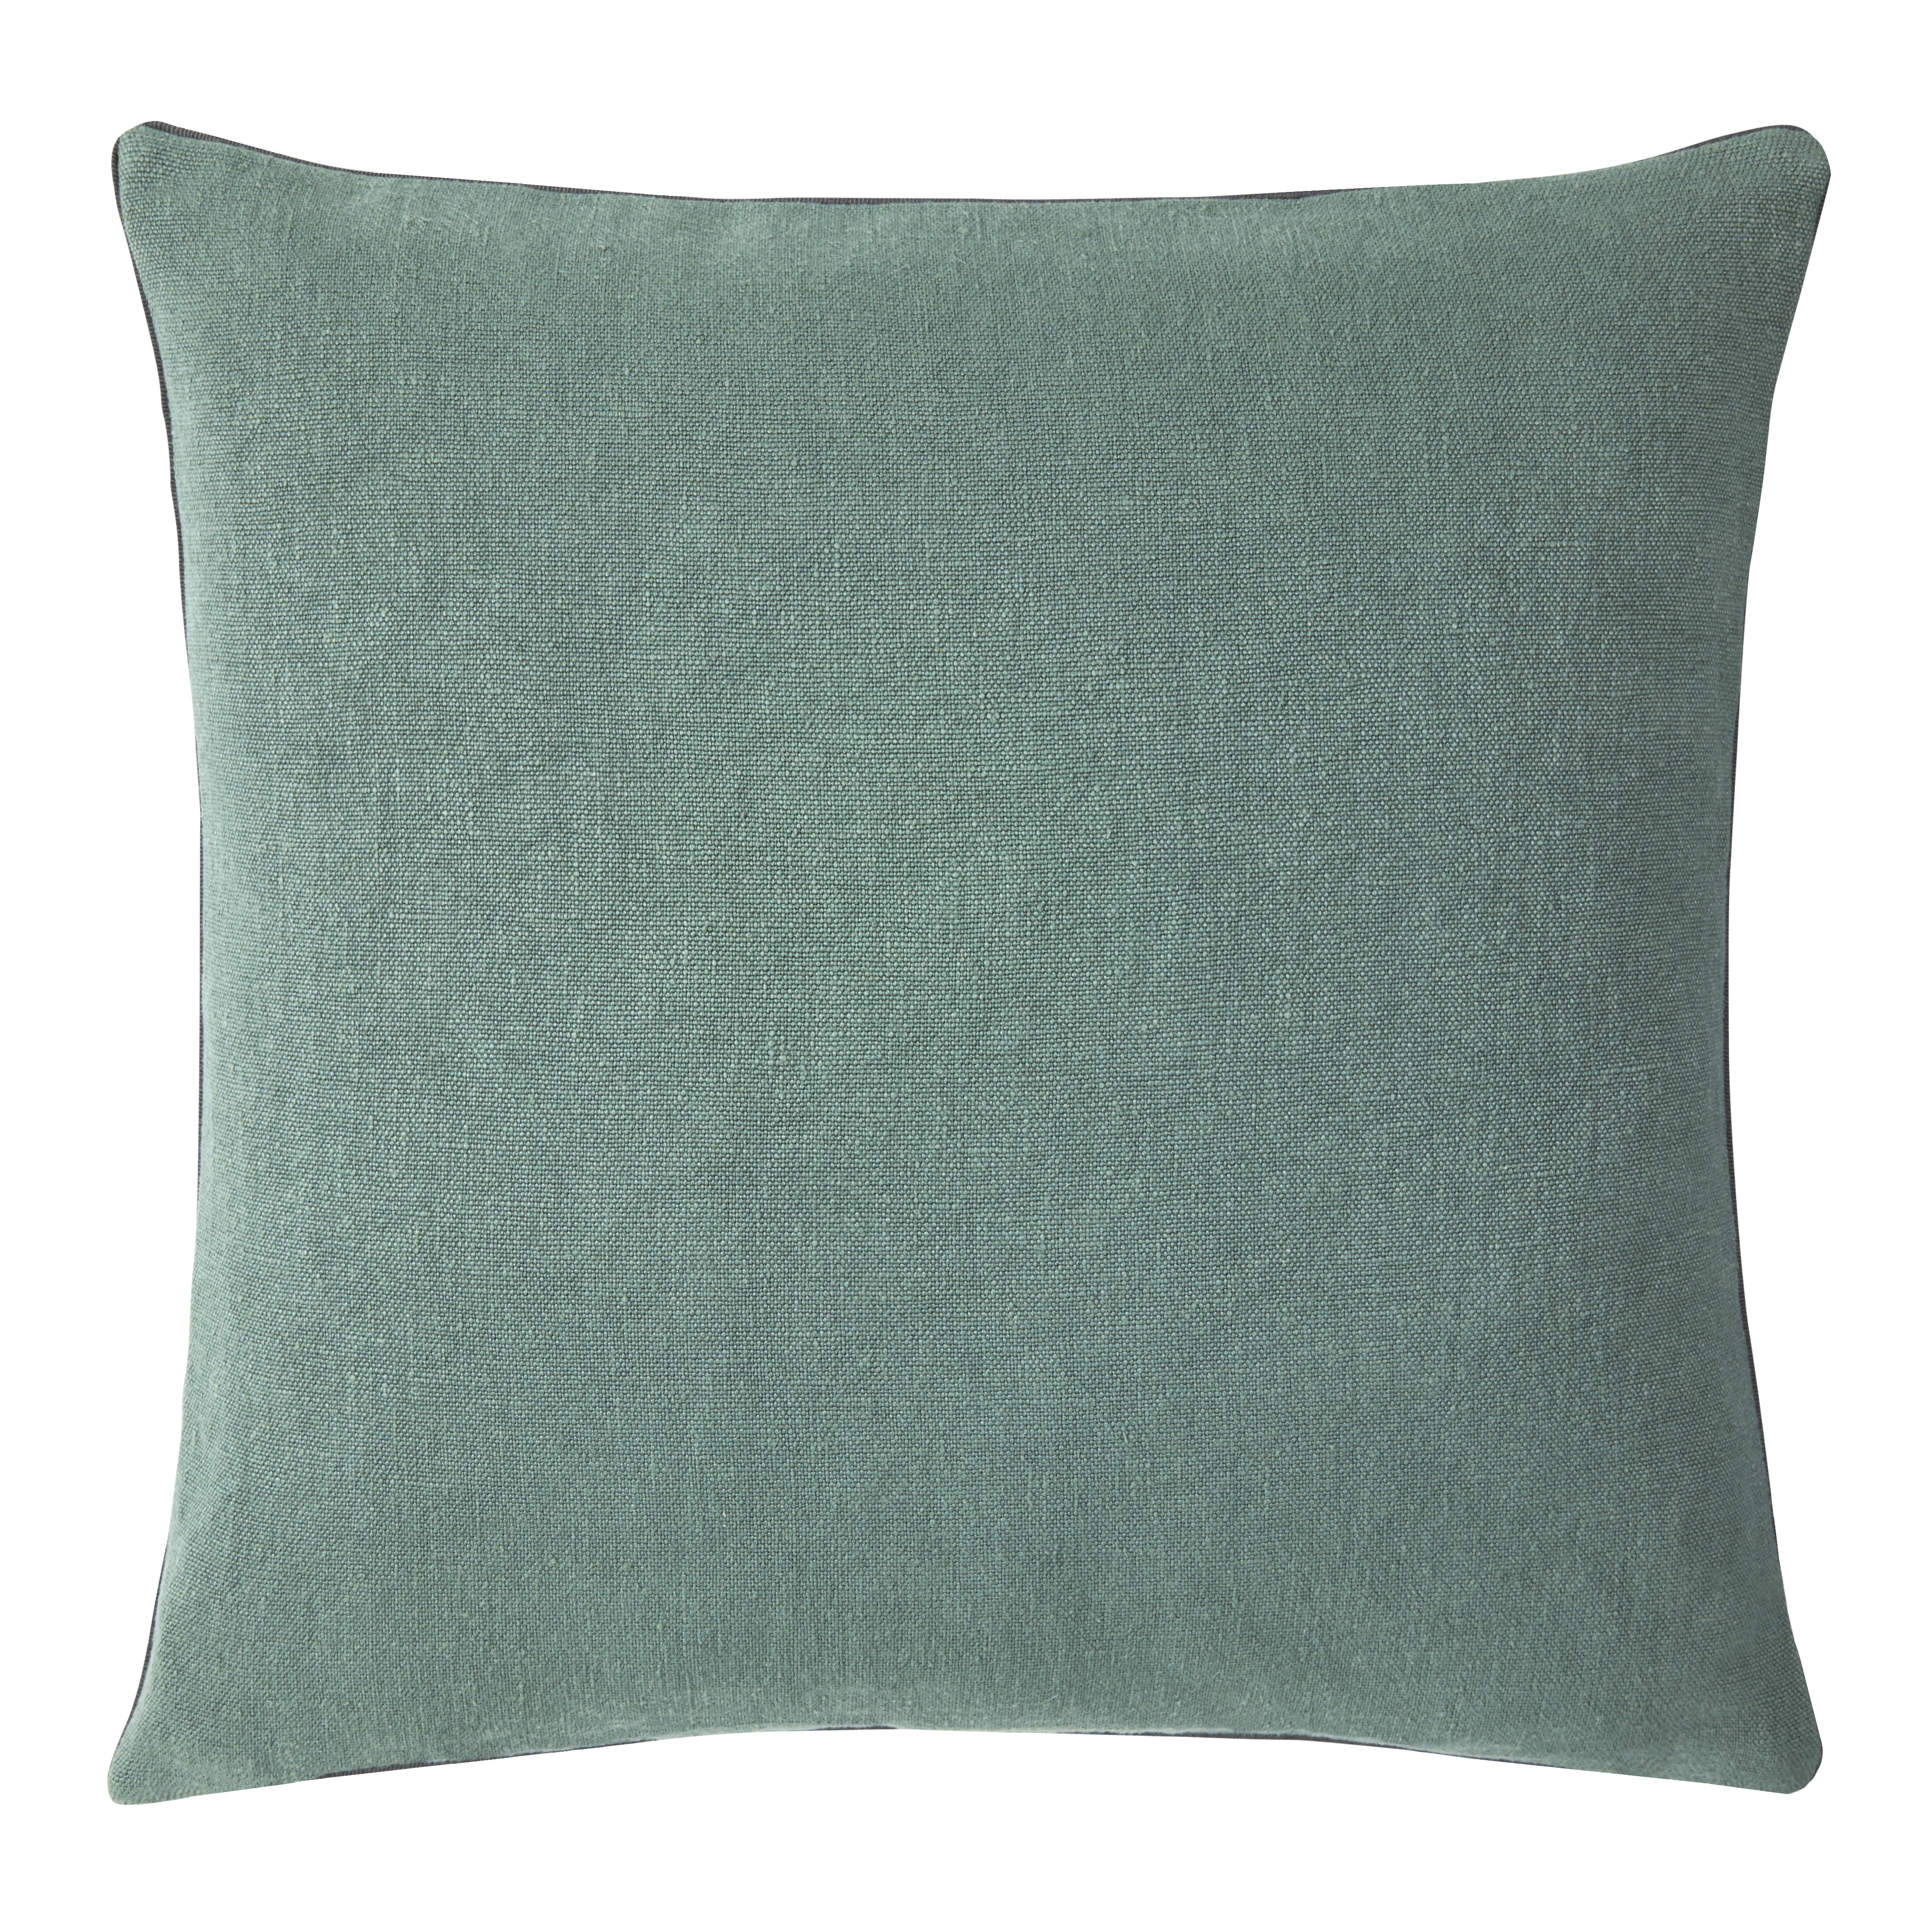 Iosis Pigment Accent Pillow